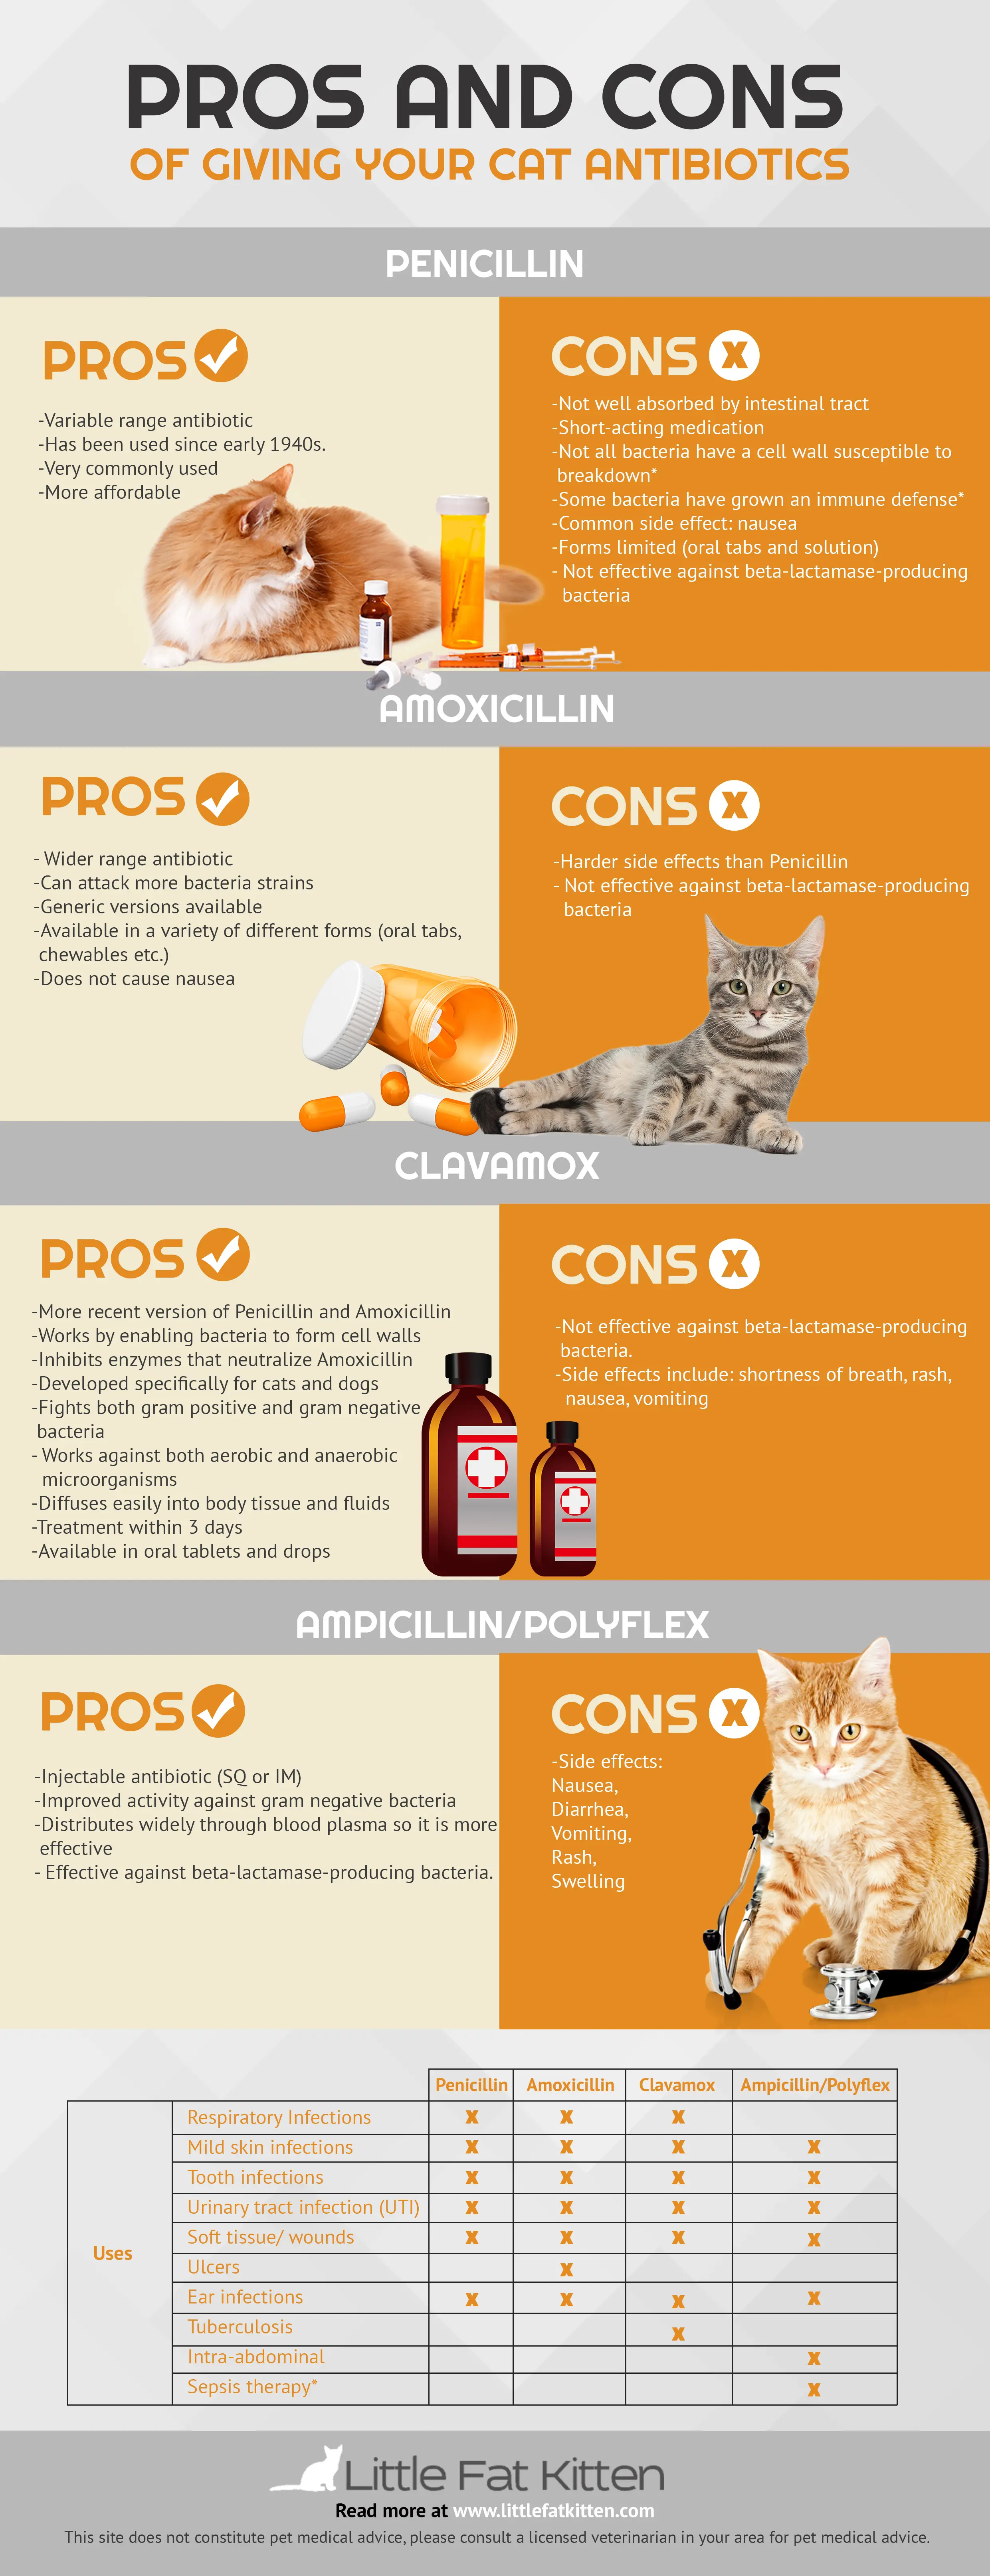 pros and cons of giving your cat penicilin